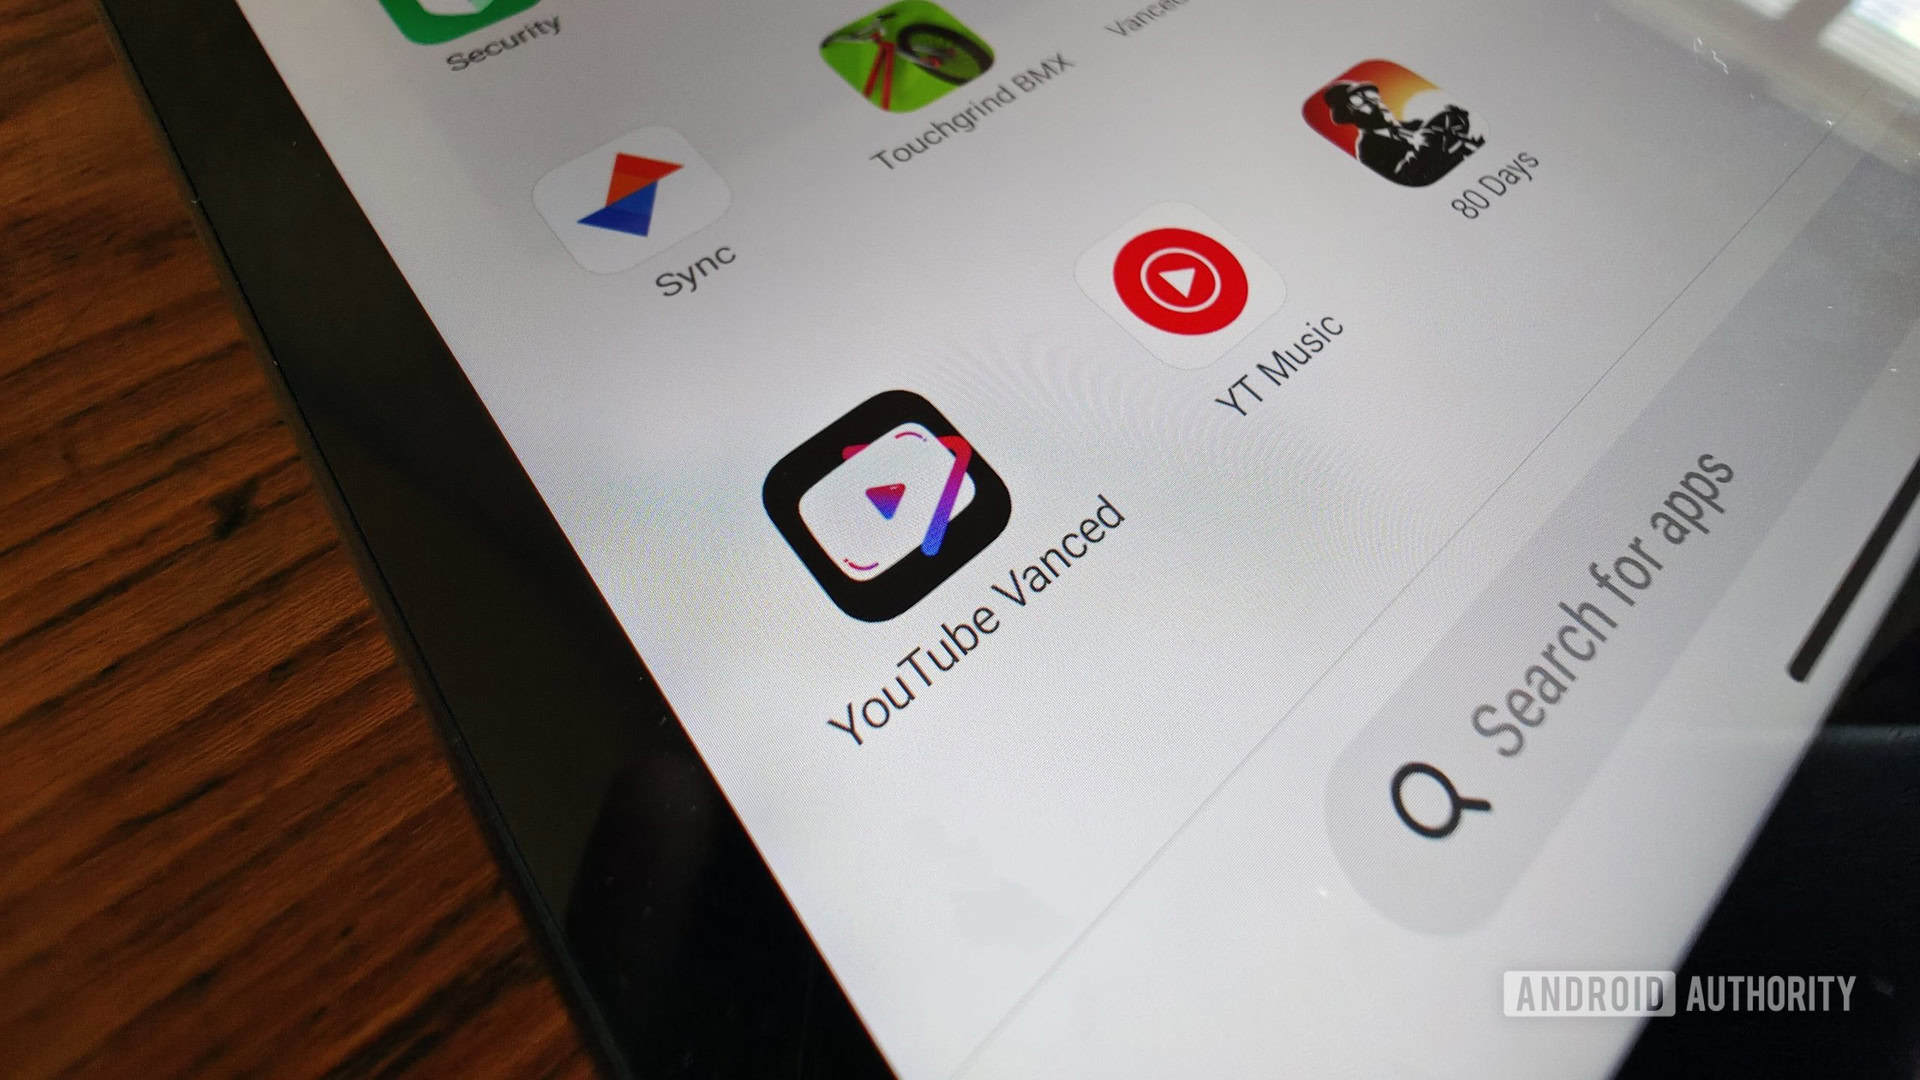 The excellent YouTube Vanced app has been shut down due to a Google threat